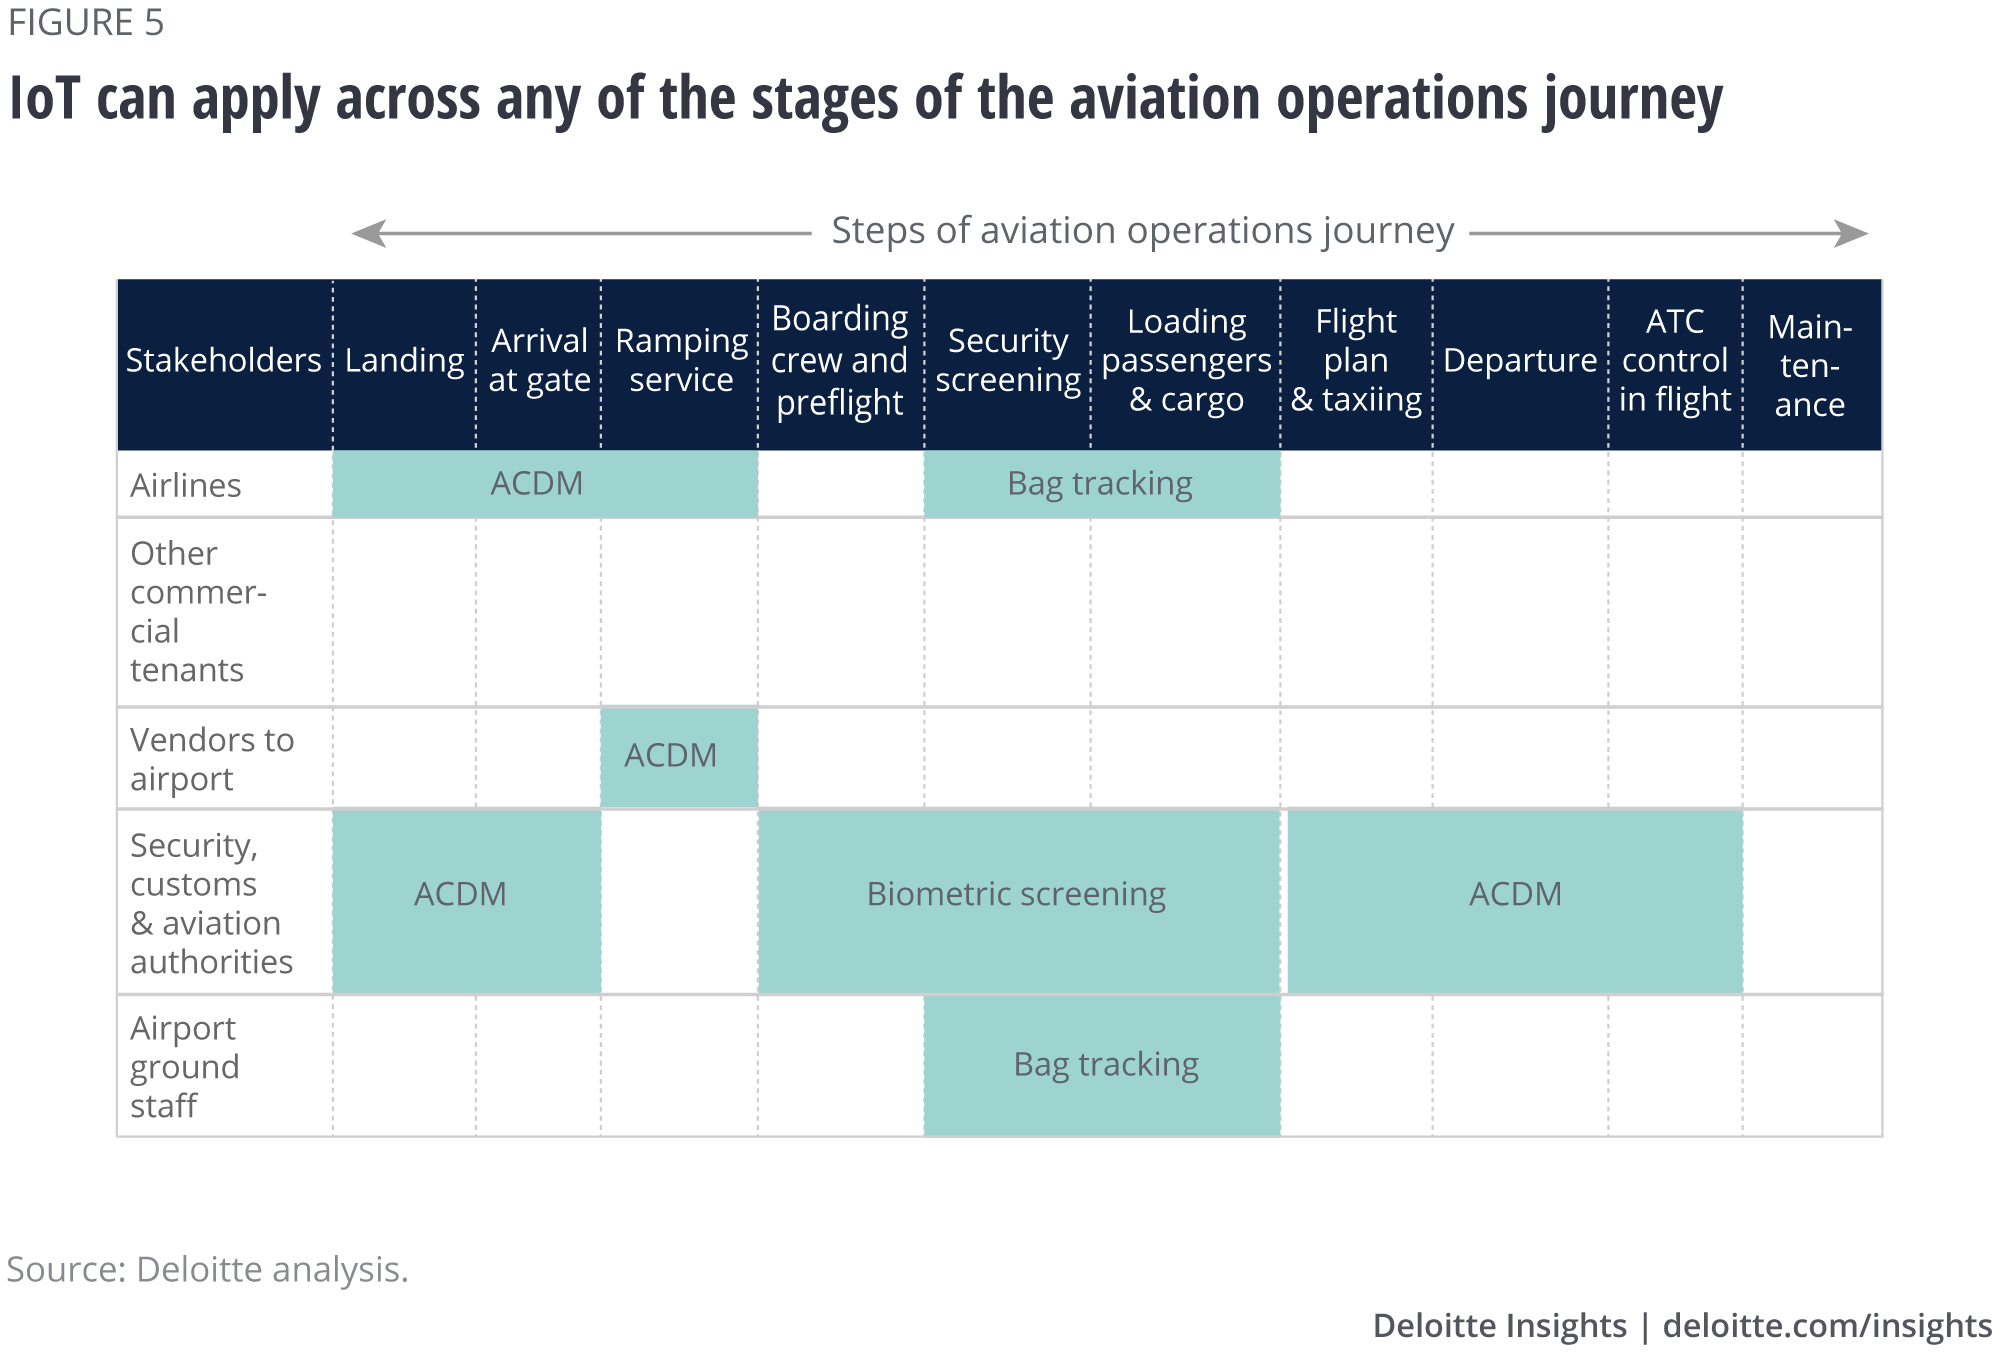 IoT can apply across any of the stages of the aviation operations journey